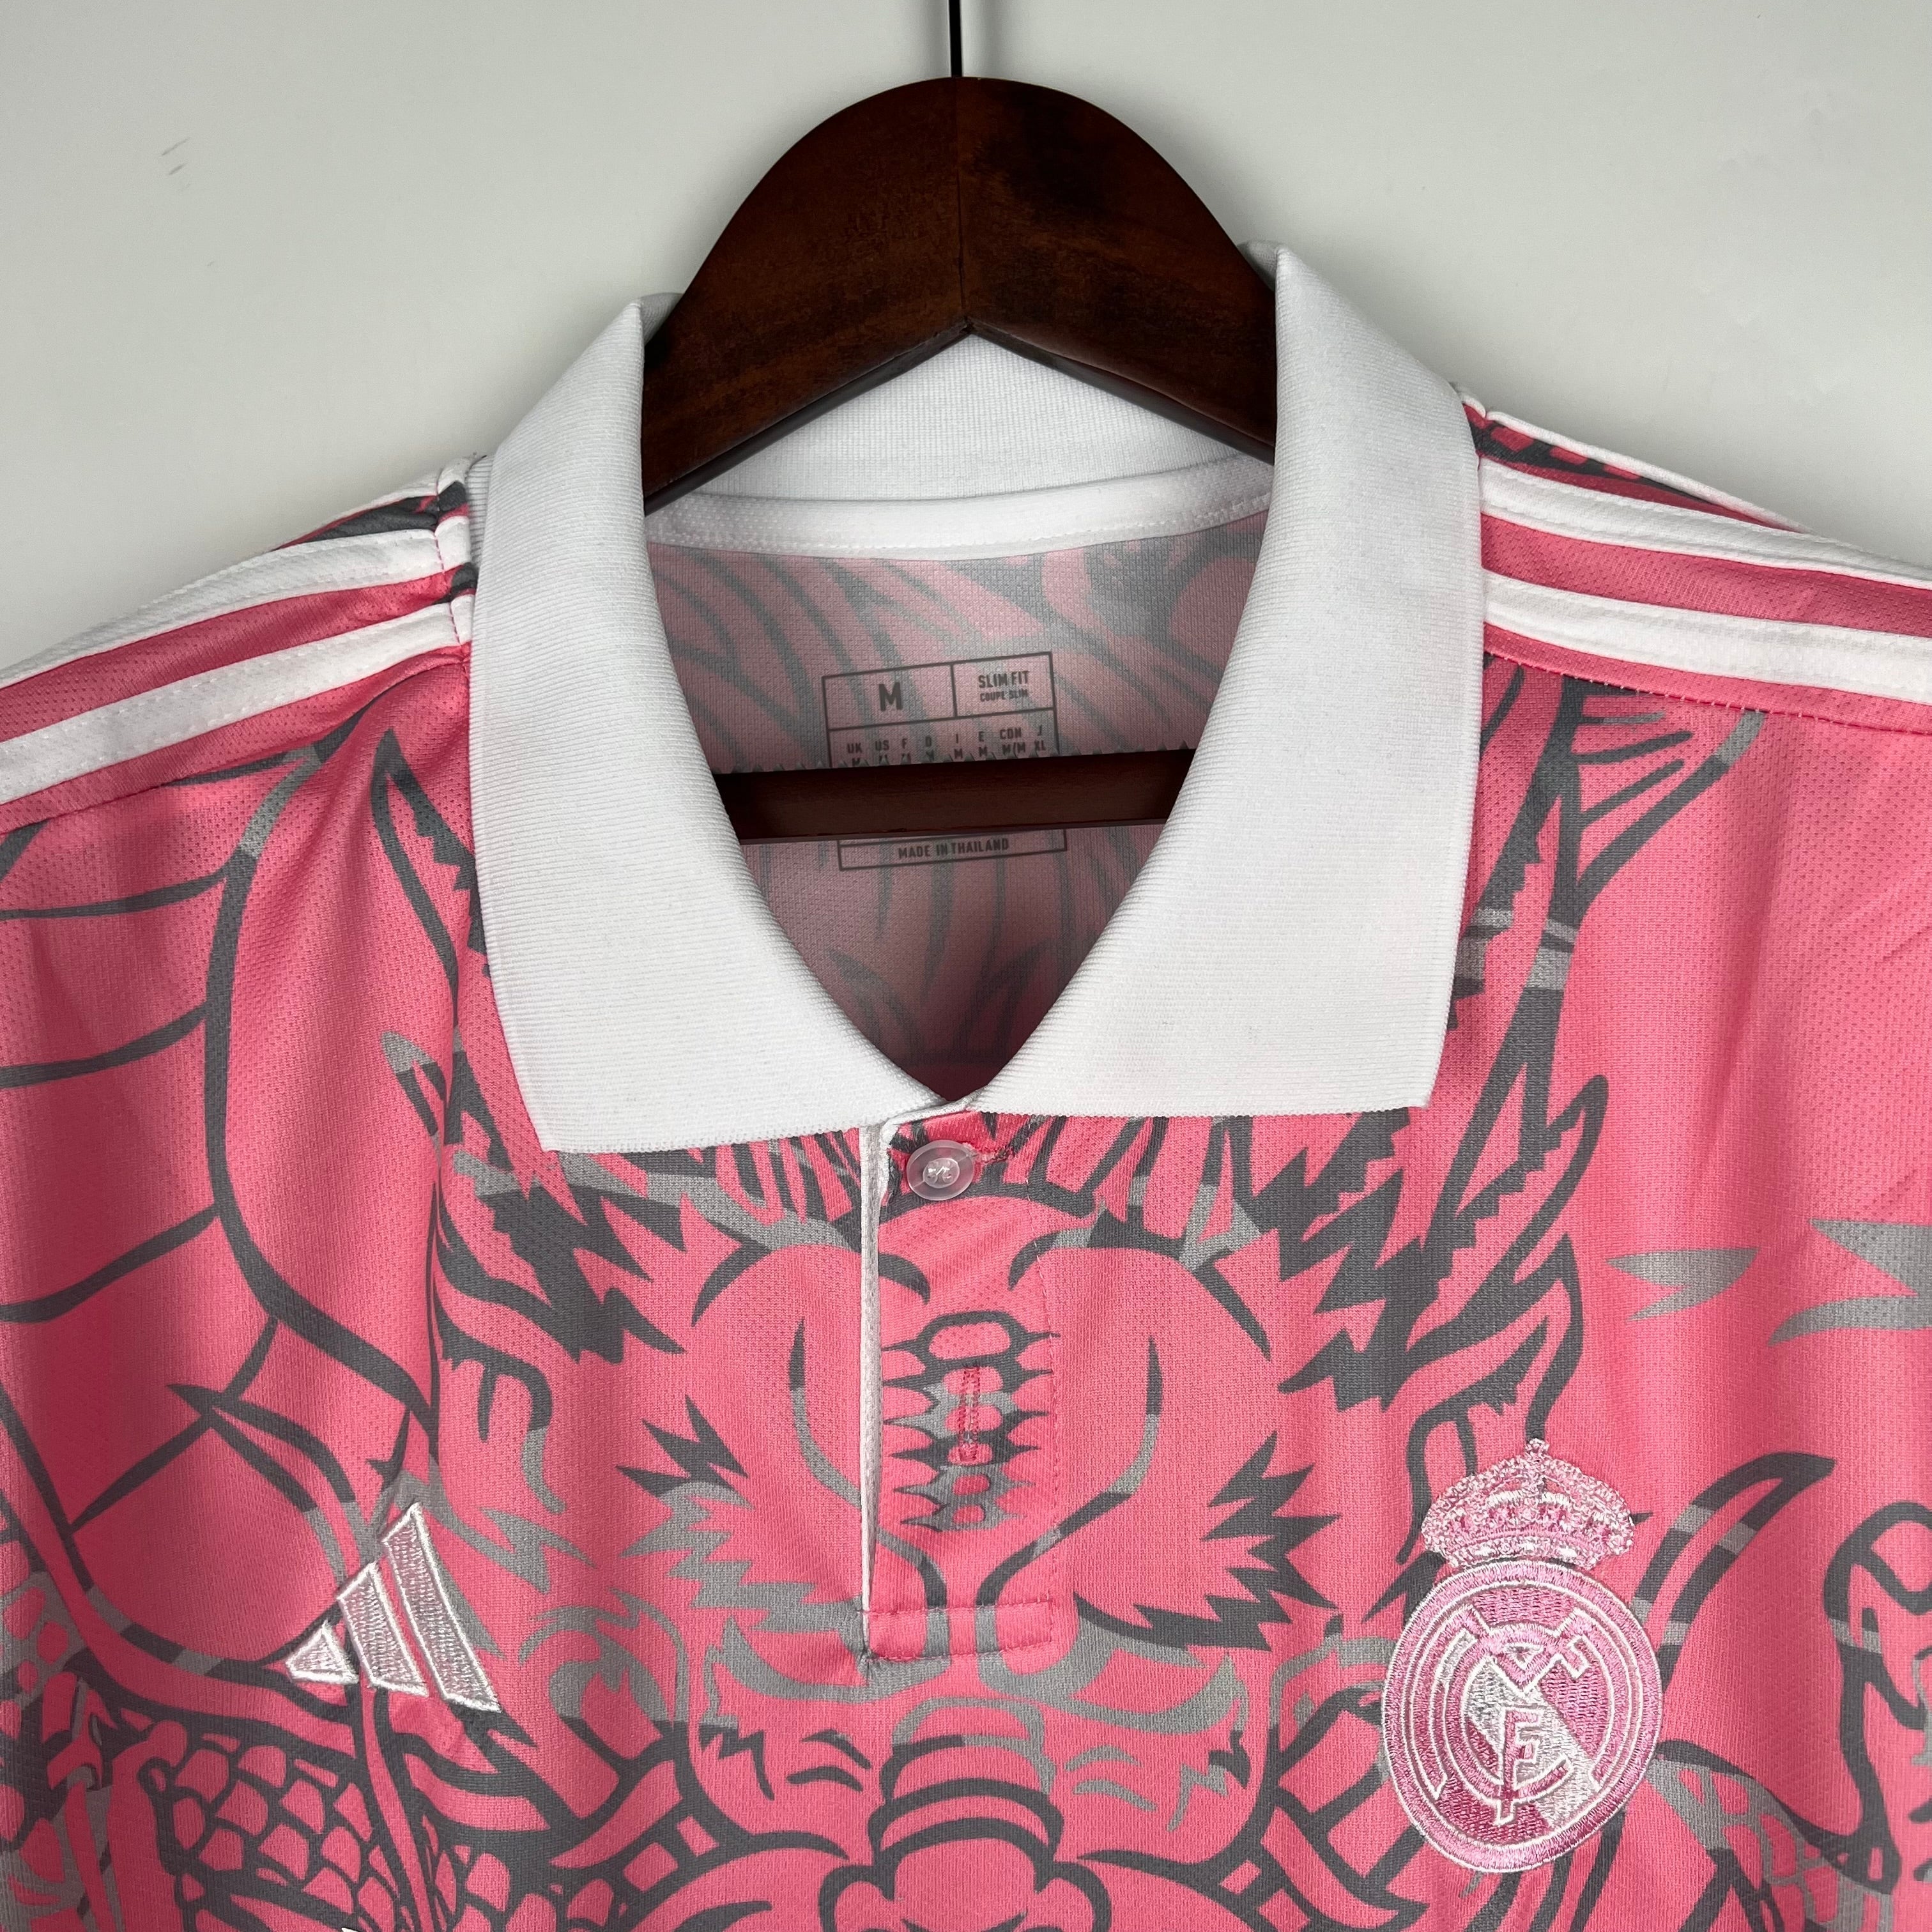 pink real madrid jersey